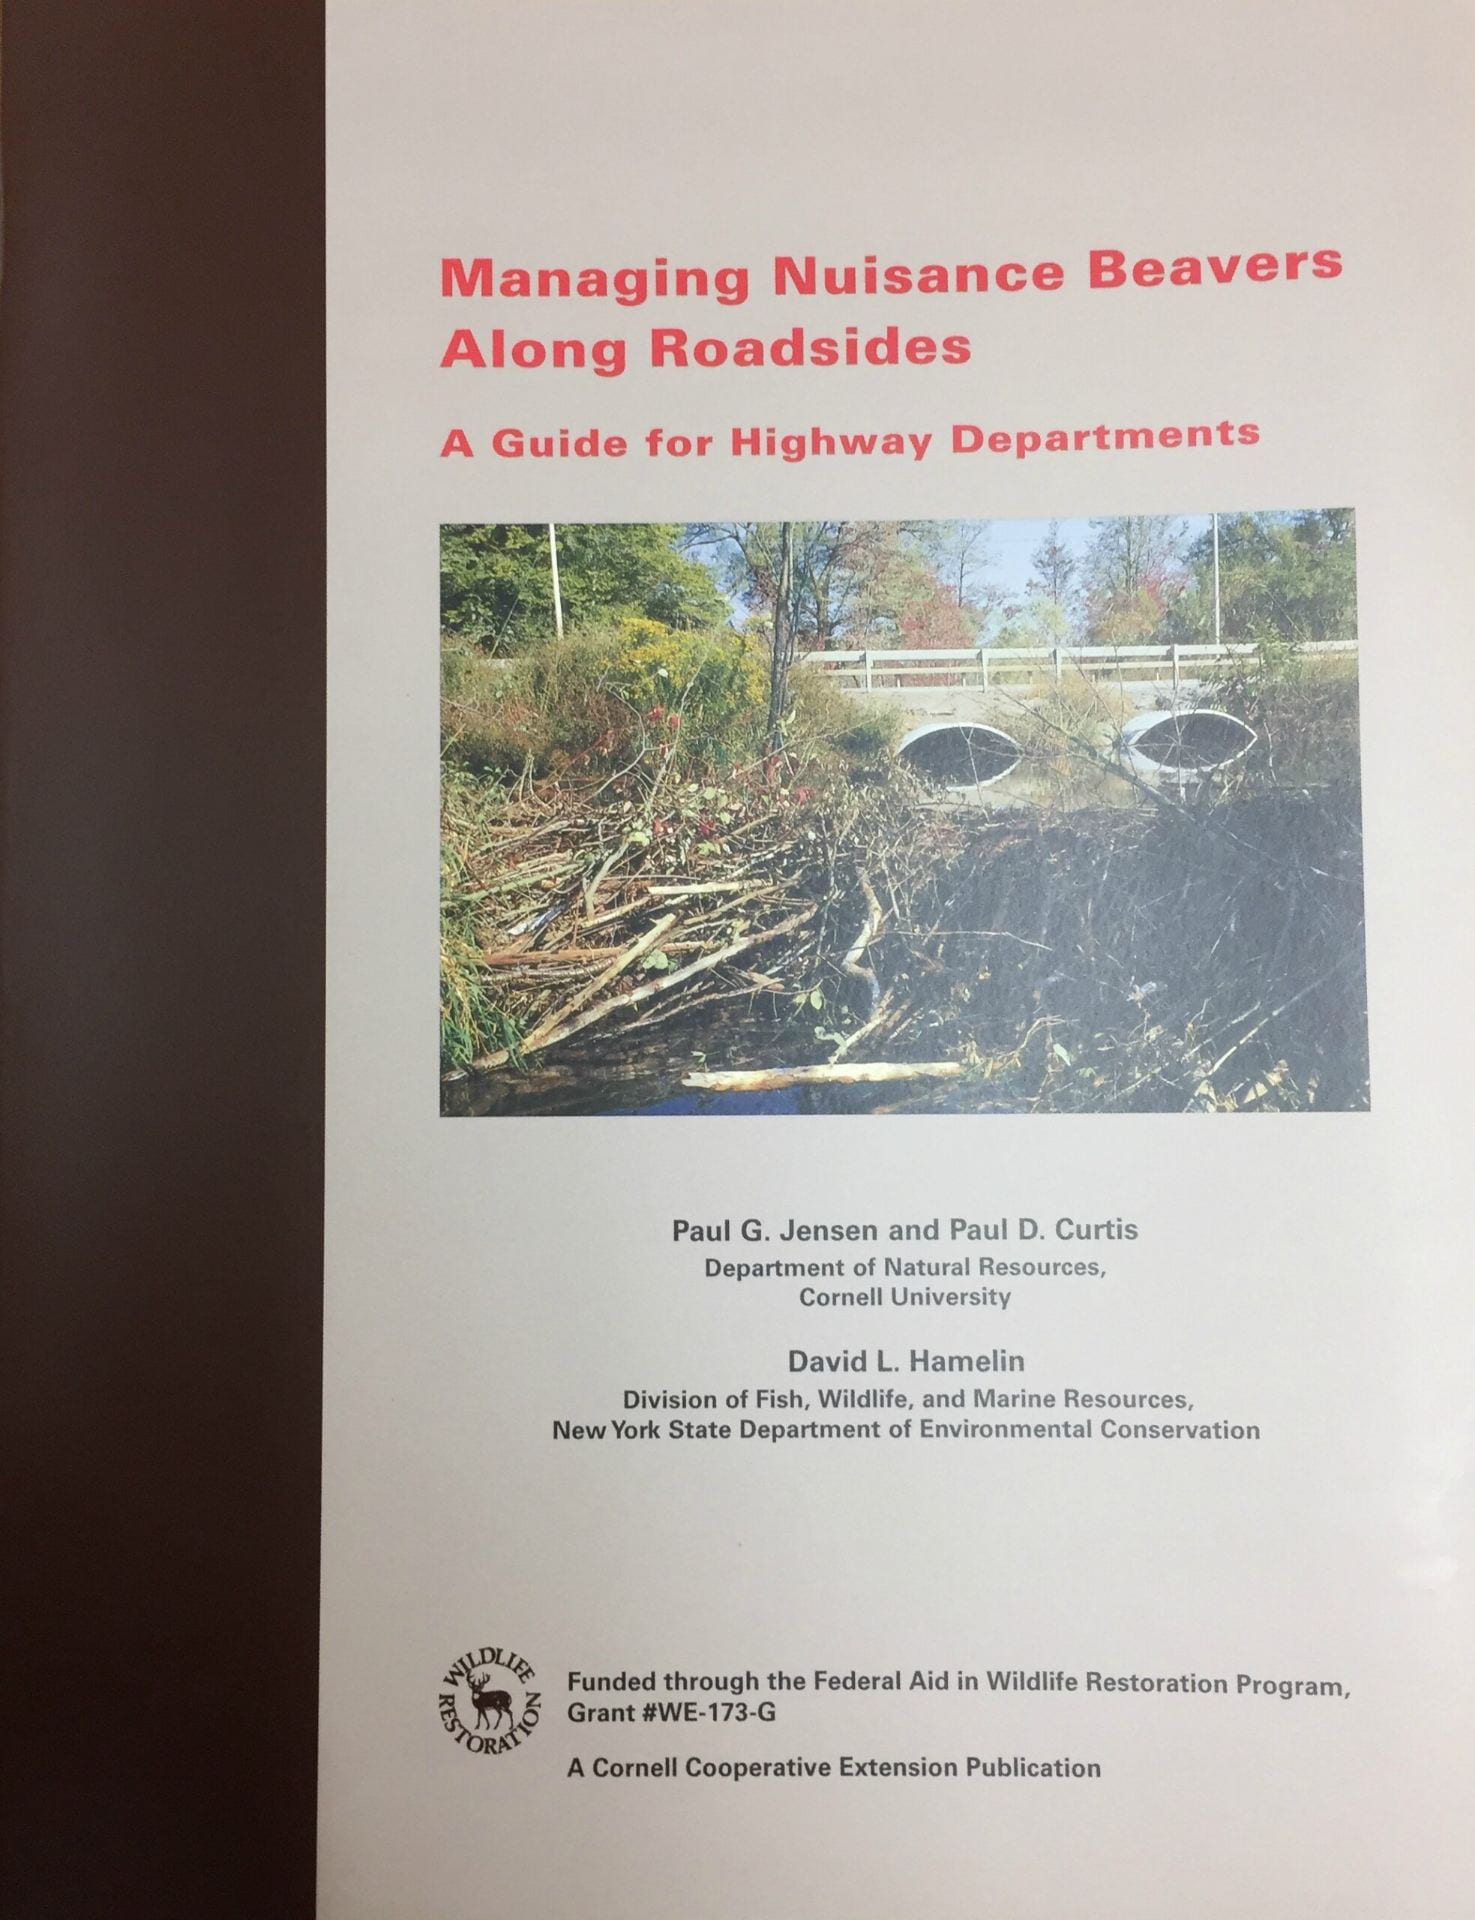 Managing Nuisance Beavers Along Roadside: A Guide for Highway Departments cover